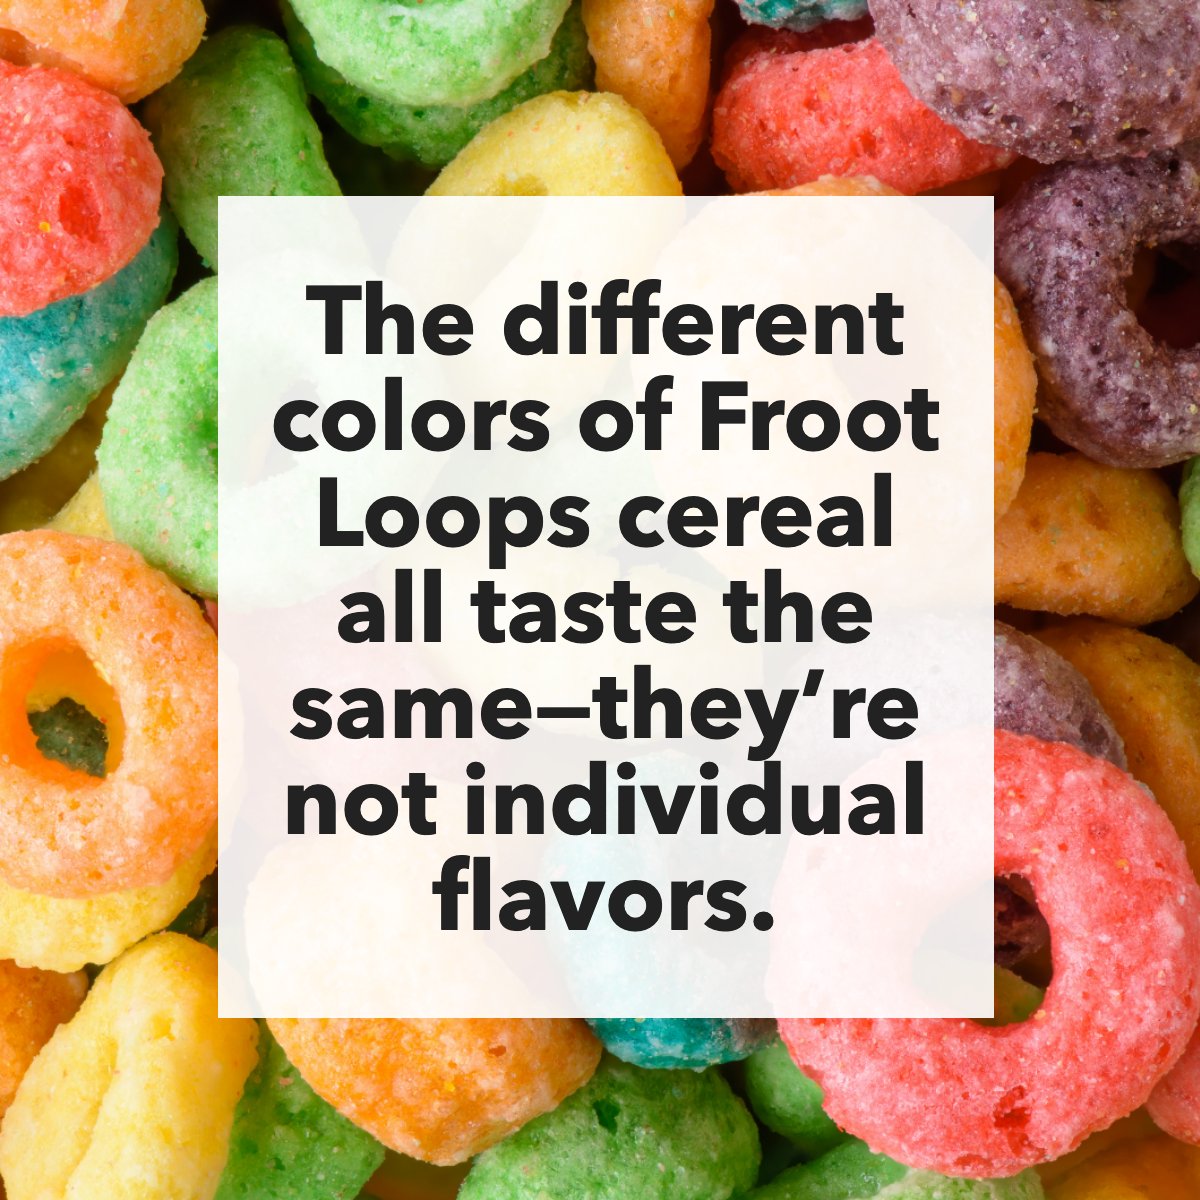 Did you know? 🤯

#frootloops #didyouknow #fact #randomfact #childhoodmemories #cereal